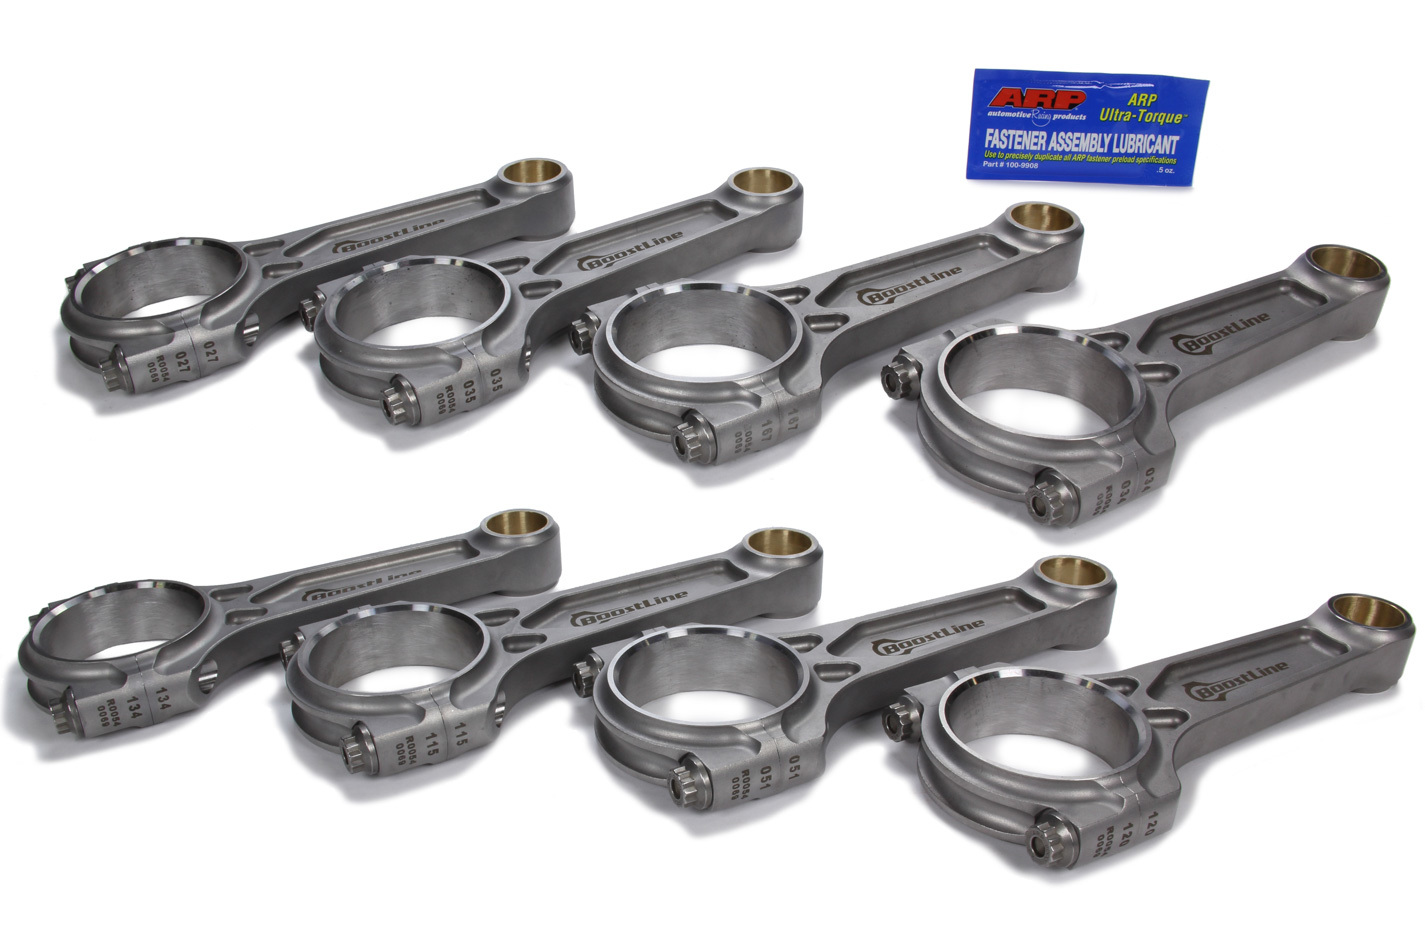 Wiseco Pistons BC6385-990 Connecting Rod, Boostline, I Beam, 6.385 Long, Bushed, 7/16 in Cap Screws, Forged Steel, Big Block Chevy, Set of 8